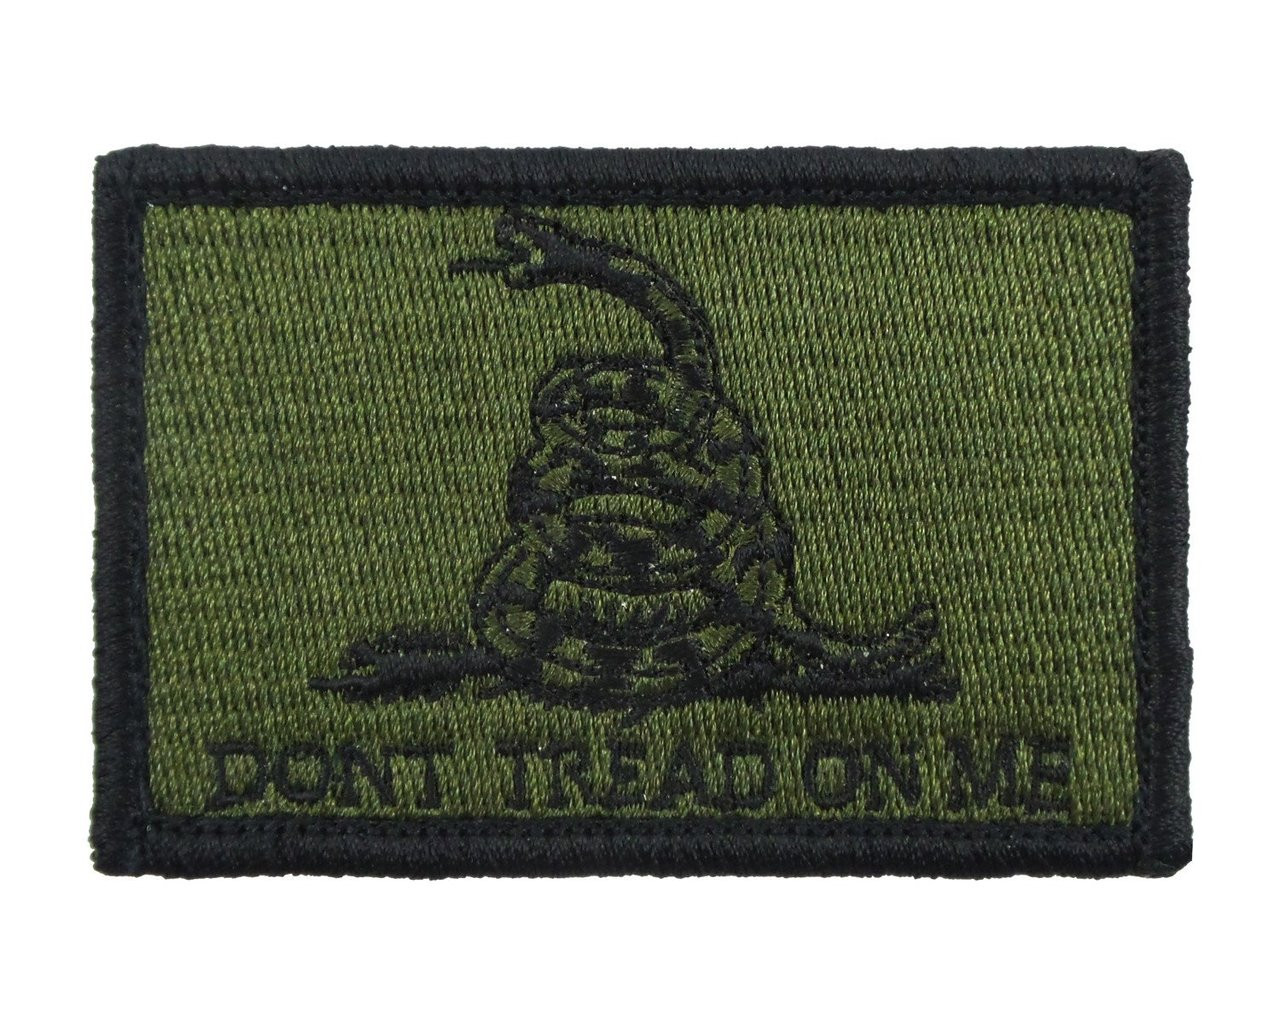  Gadsden Don't Tread On Me Tactical Patch - ACU/Foliage : Sports  & Outdoors